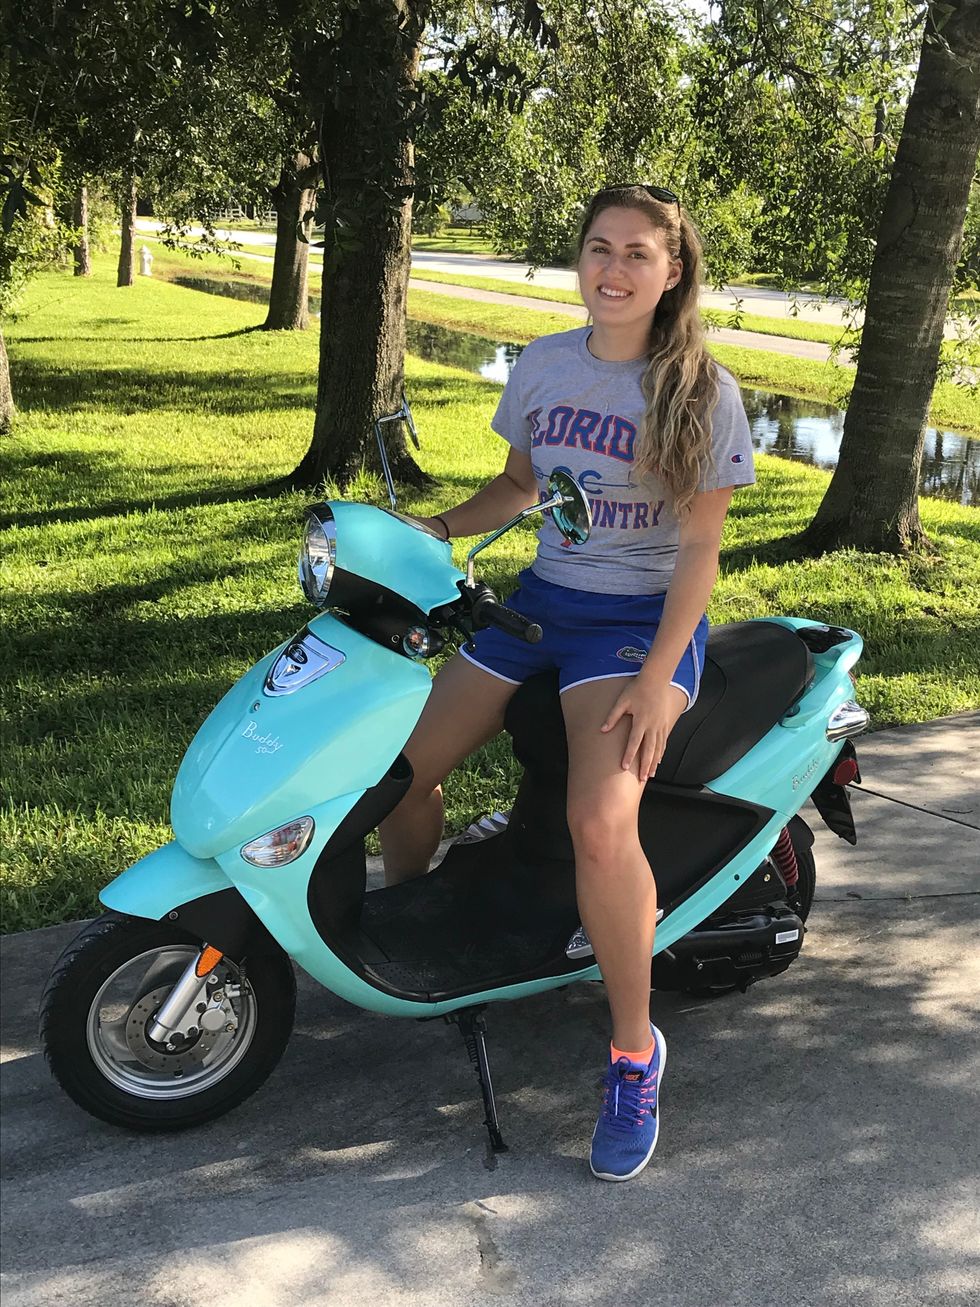 5 Reasons Why You Need To Own A Scooter On The University Of Florida's Campus